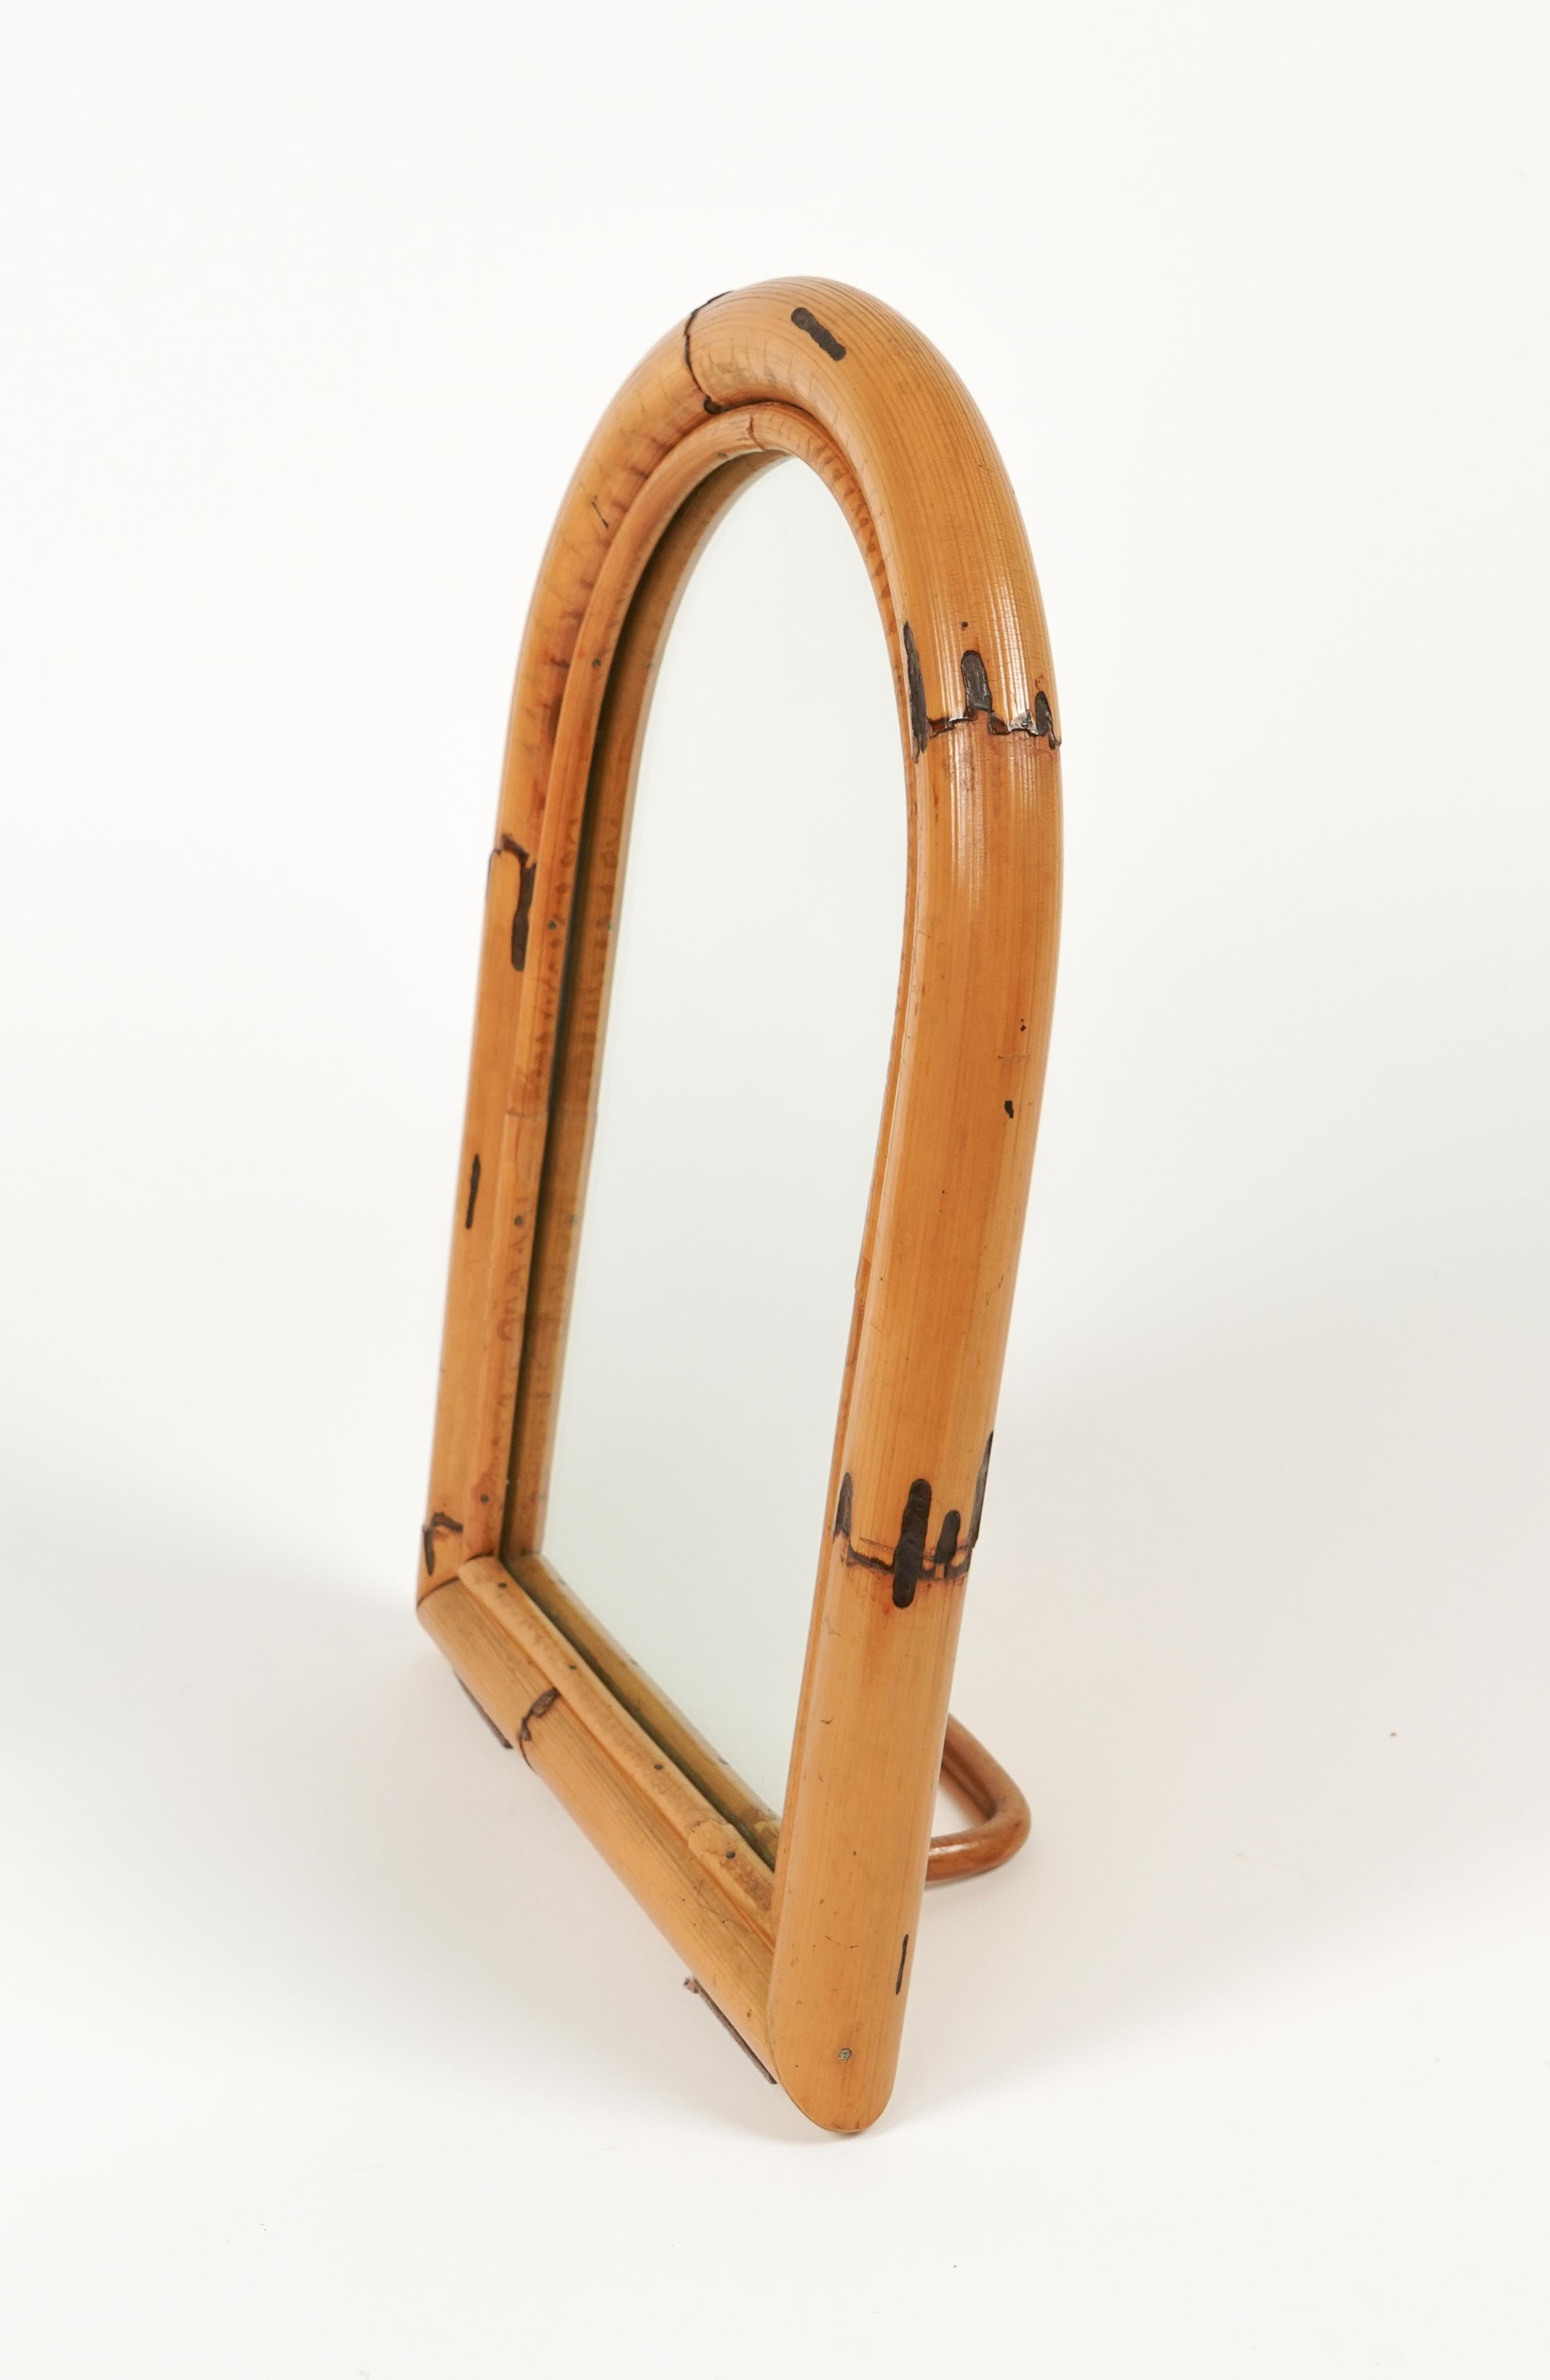 Midcentury Arched Bamboo and Rattan Table Mirror, Italy 1970s For Sale 4